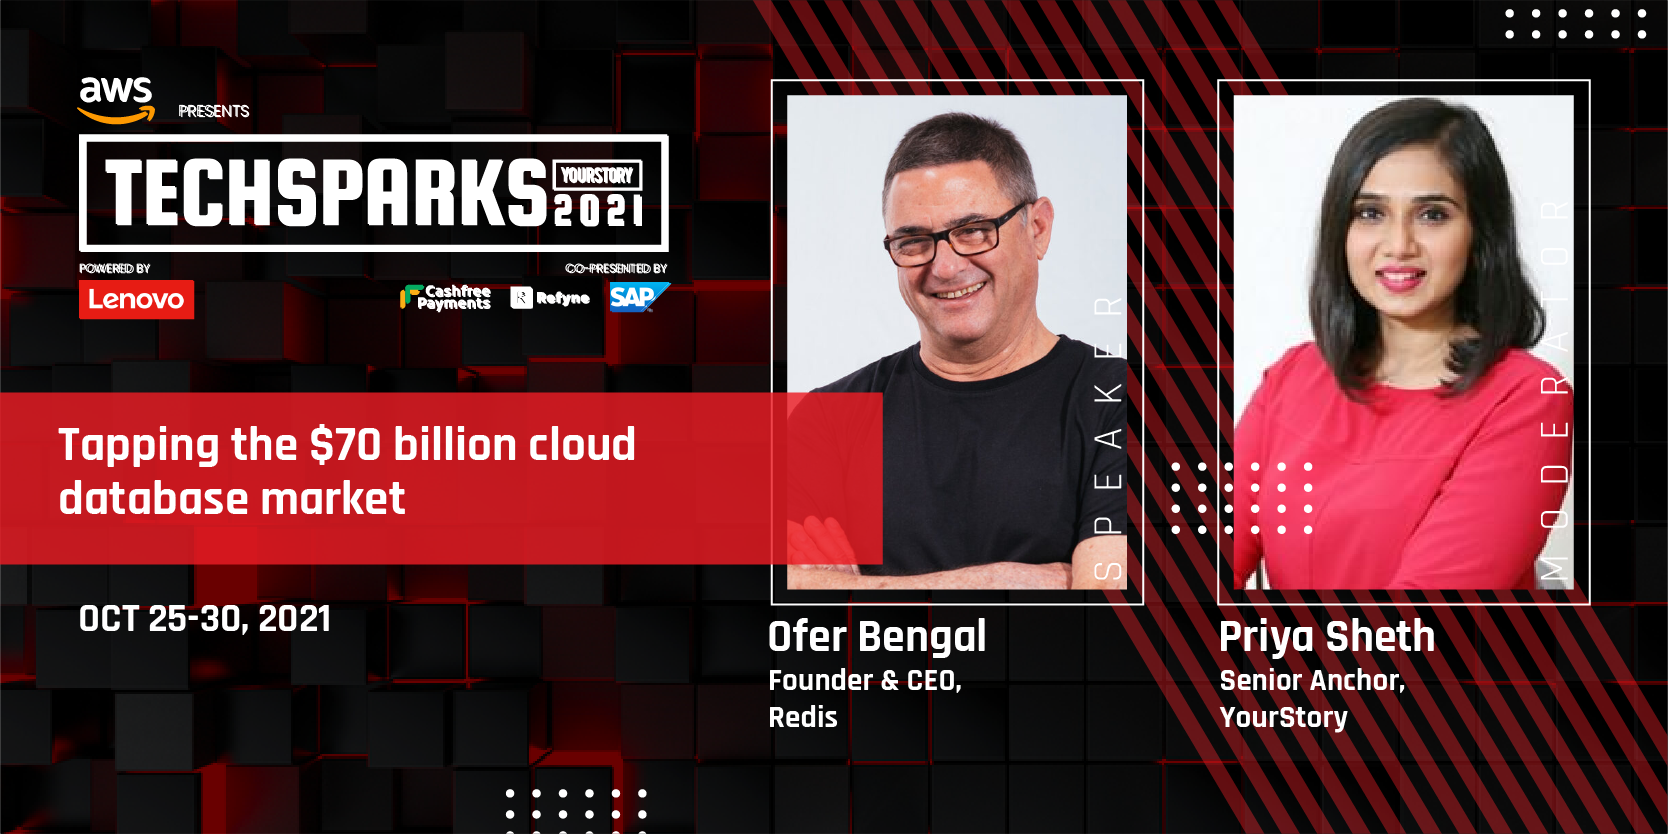 Redis Co-founder and CEO Ofer Bengal on how the pandemic accelerated digital adoption and necessitated the move to cloud 
